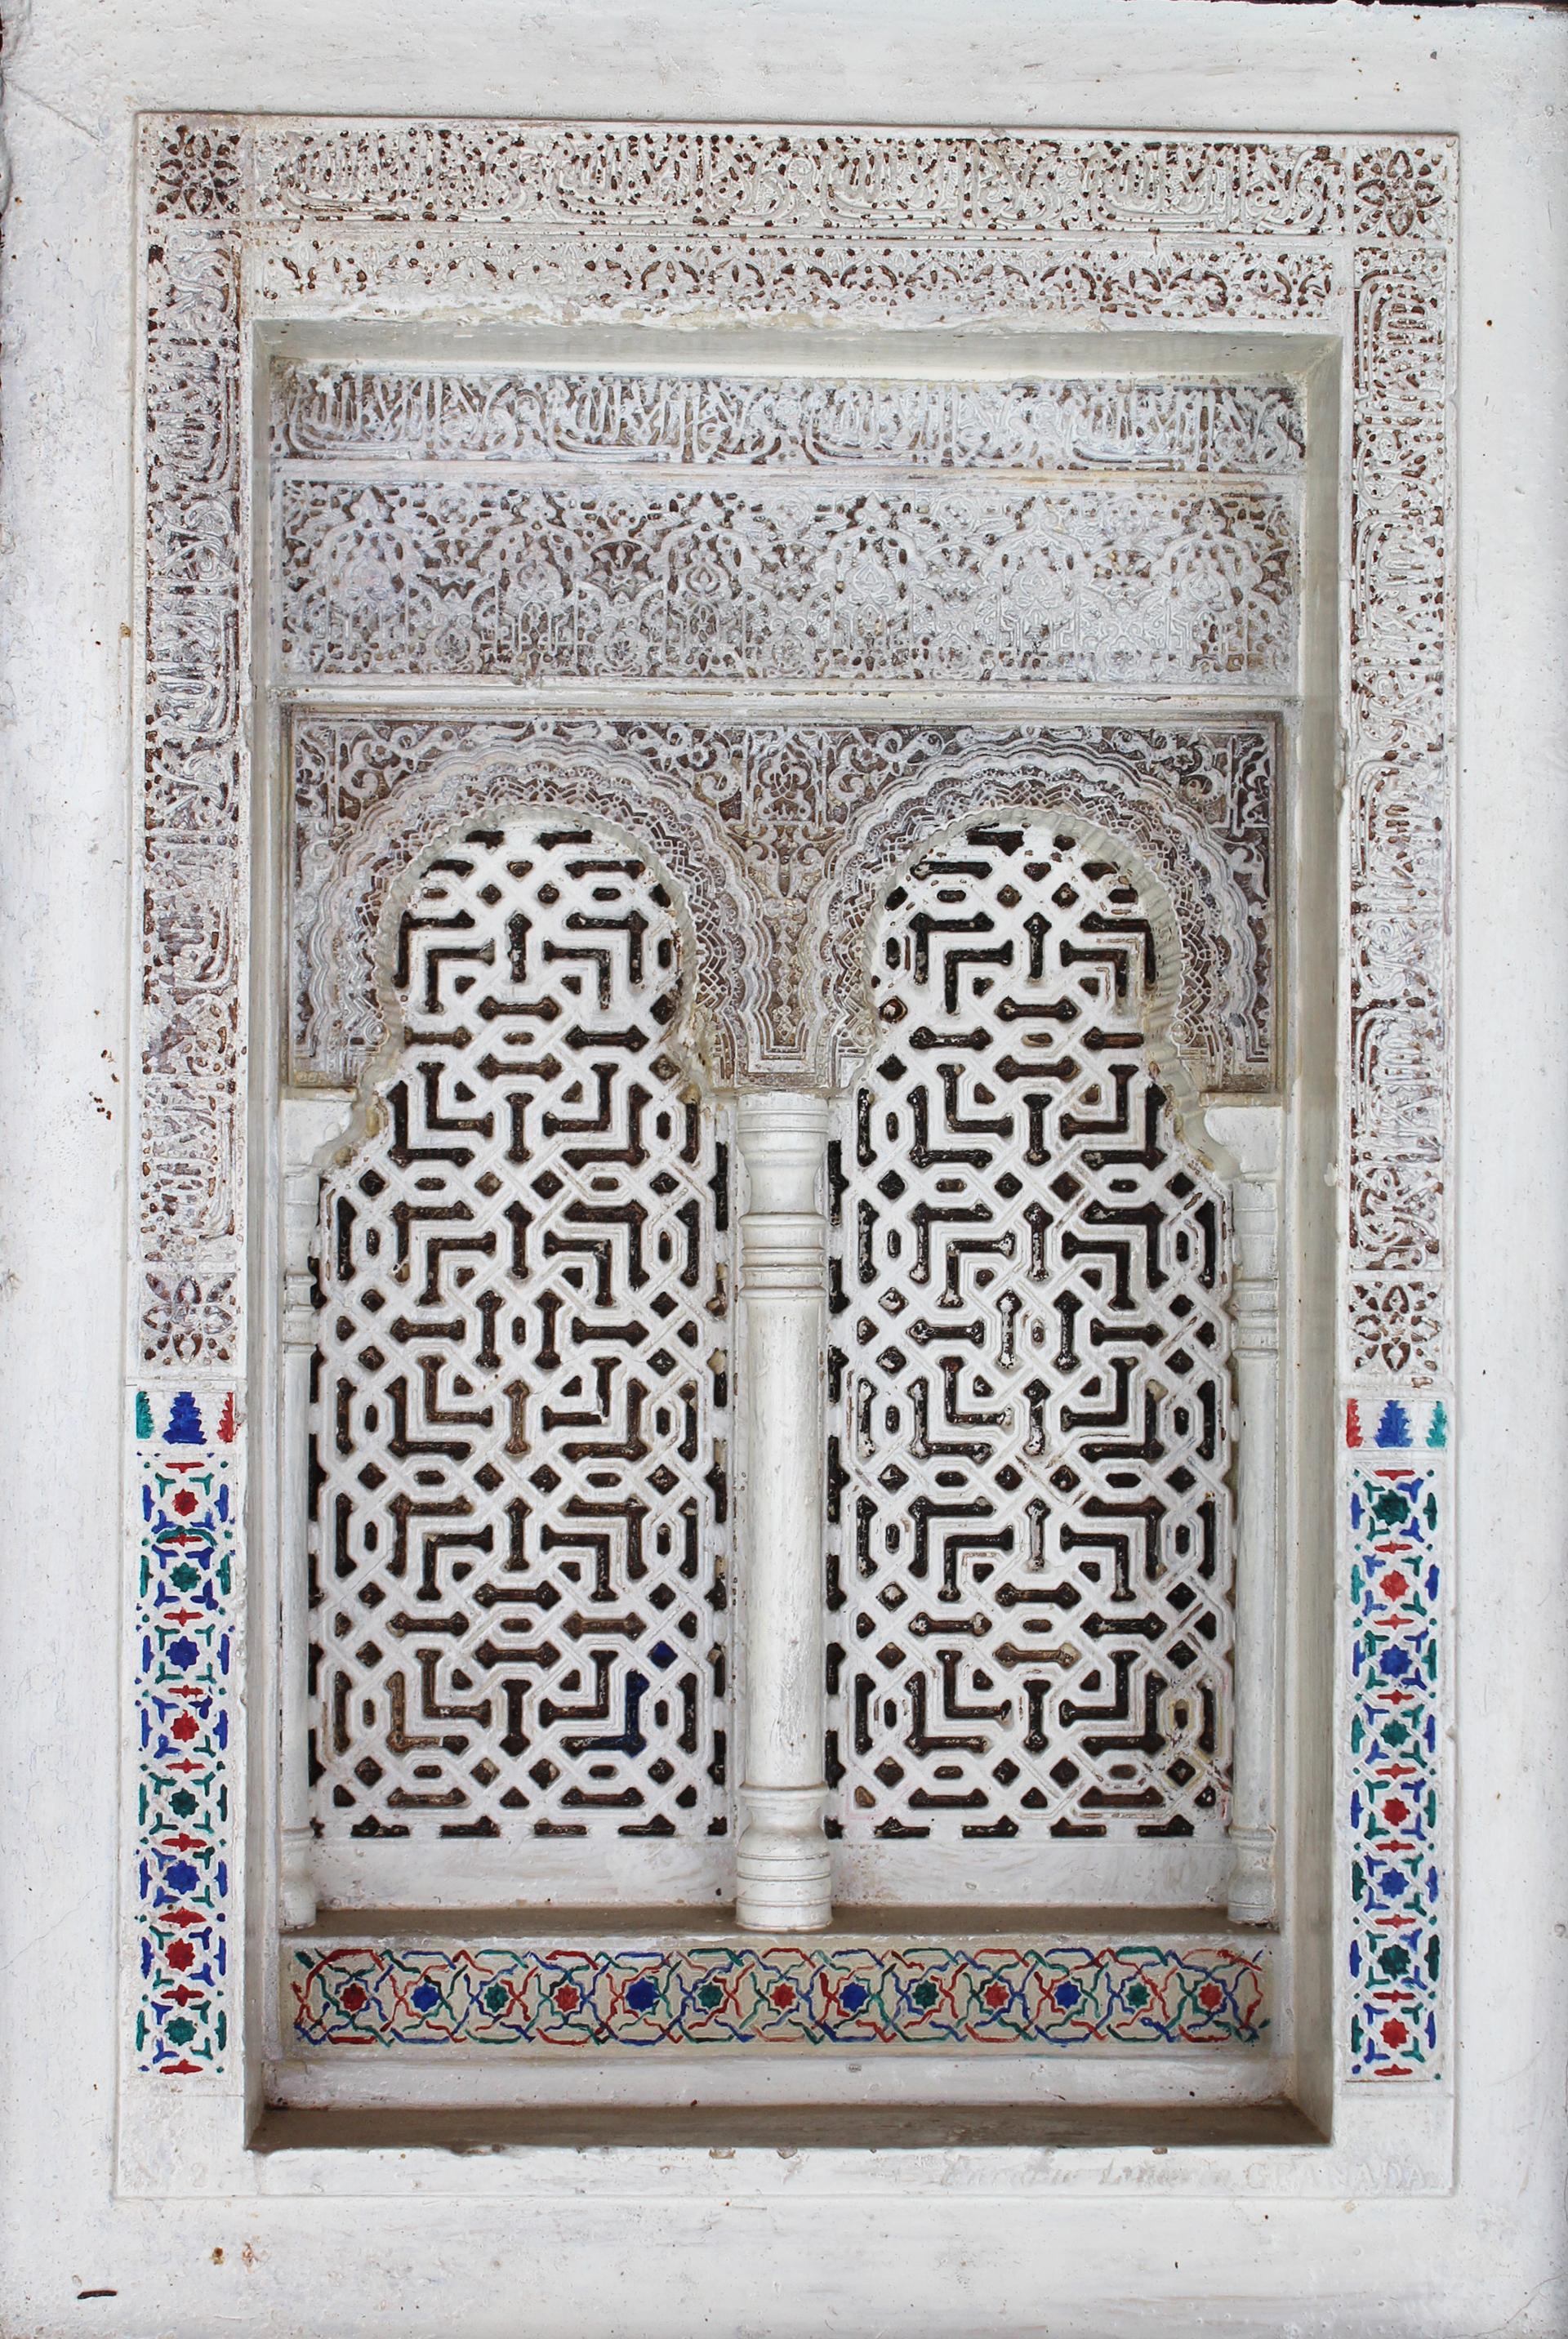 19th century Granada's Alhambra palace framed stucco mock-up with columns.
   